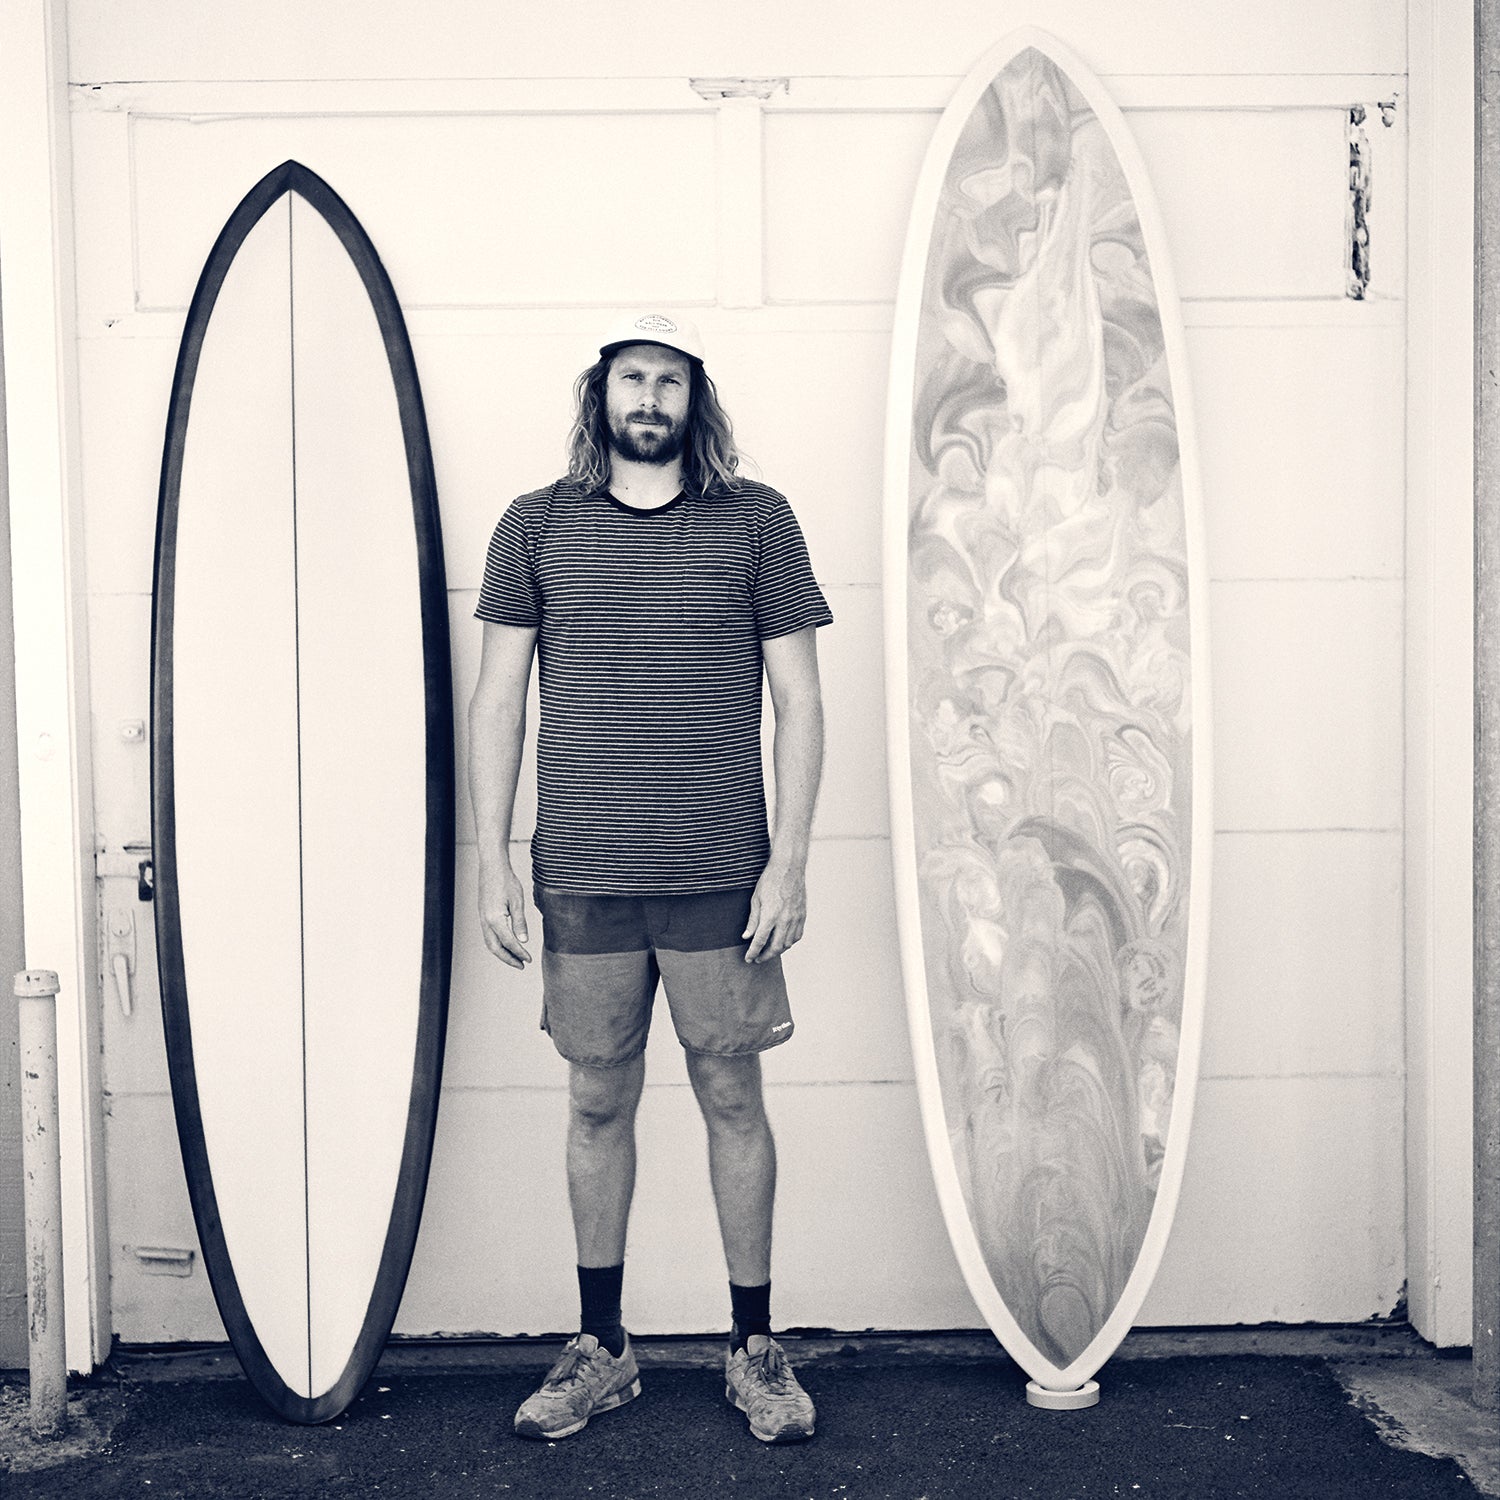 What Tools You Need to Shape a Surfboard